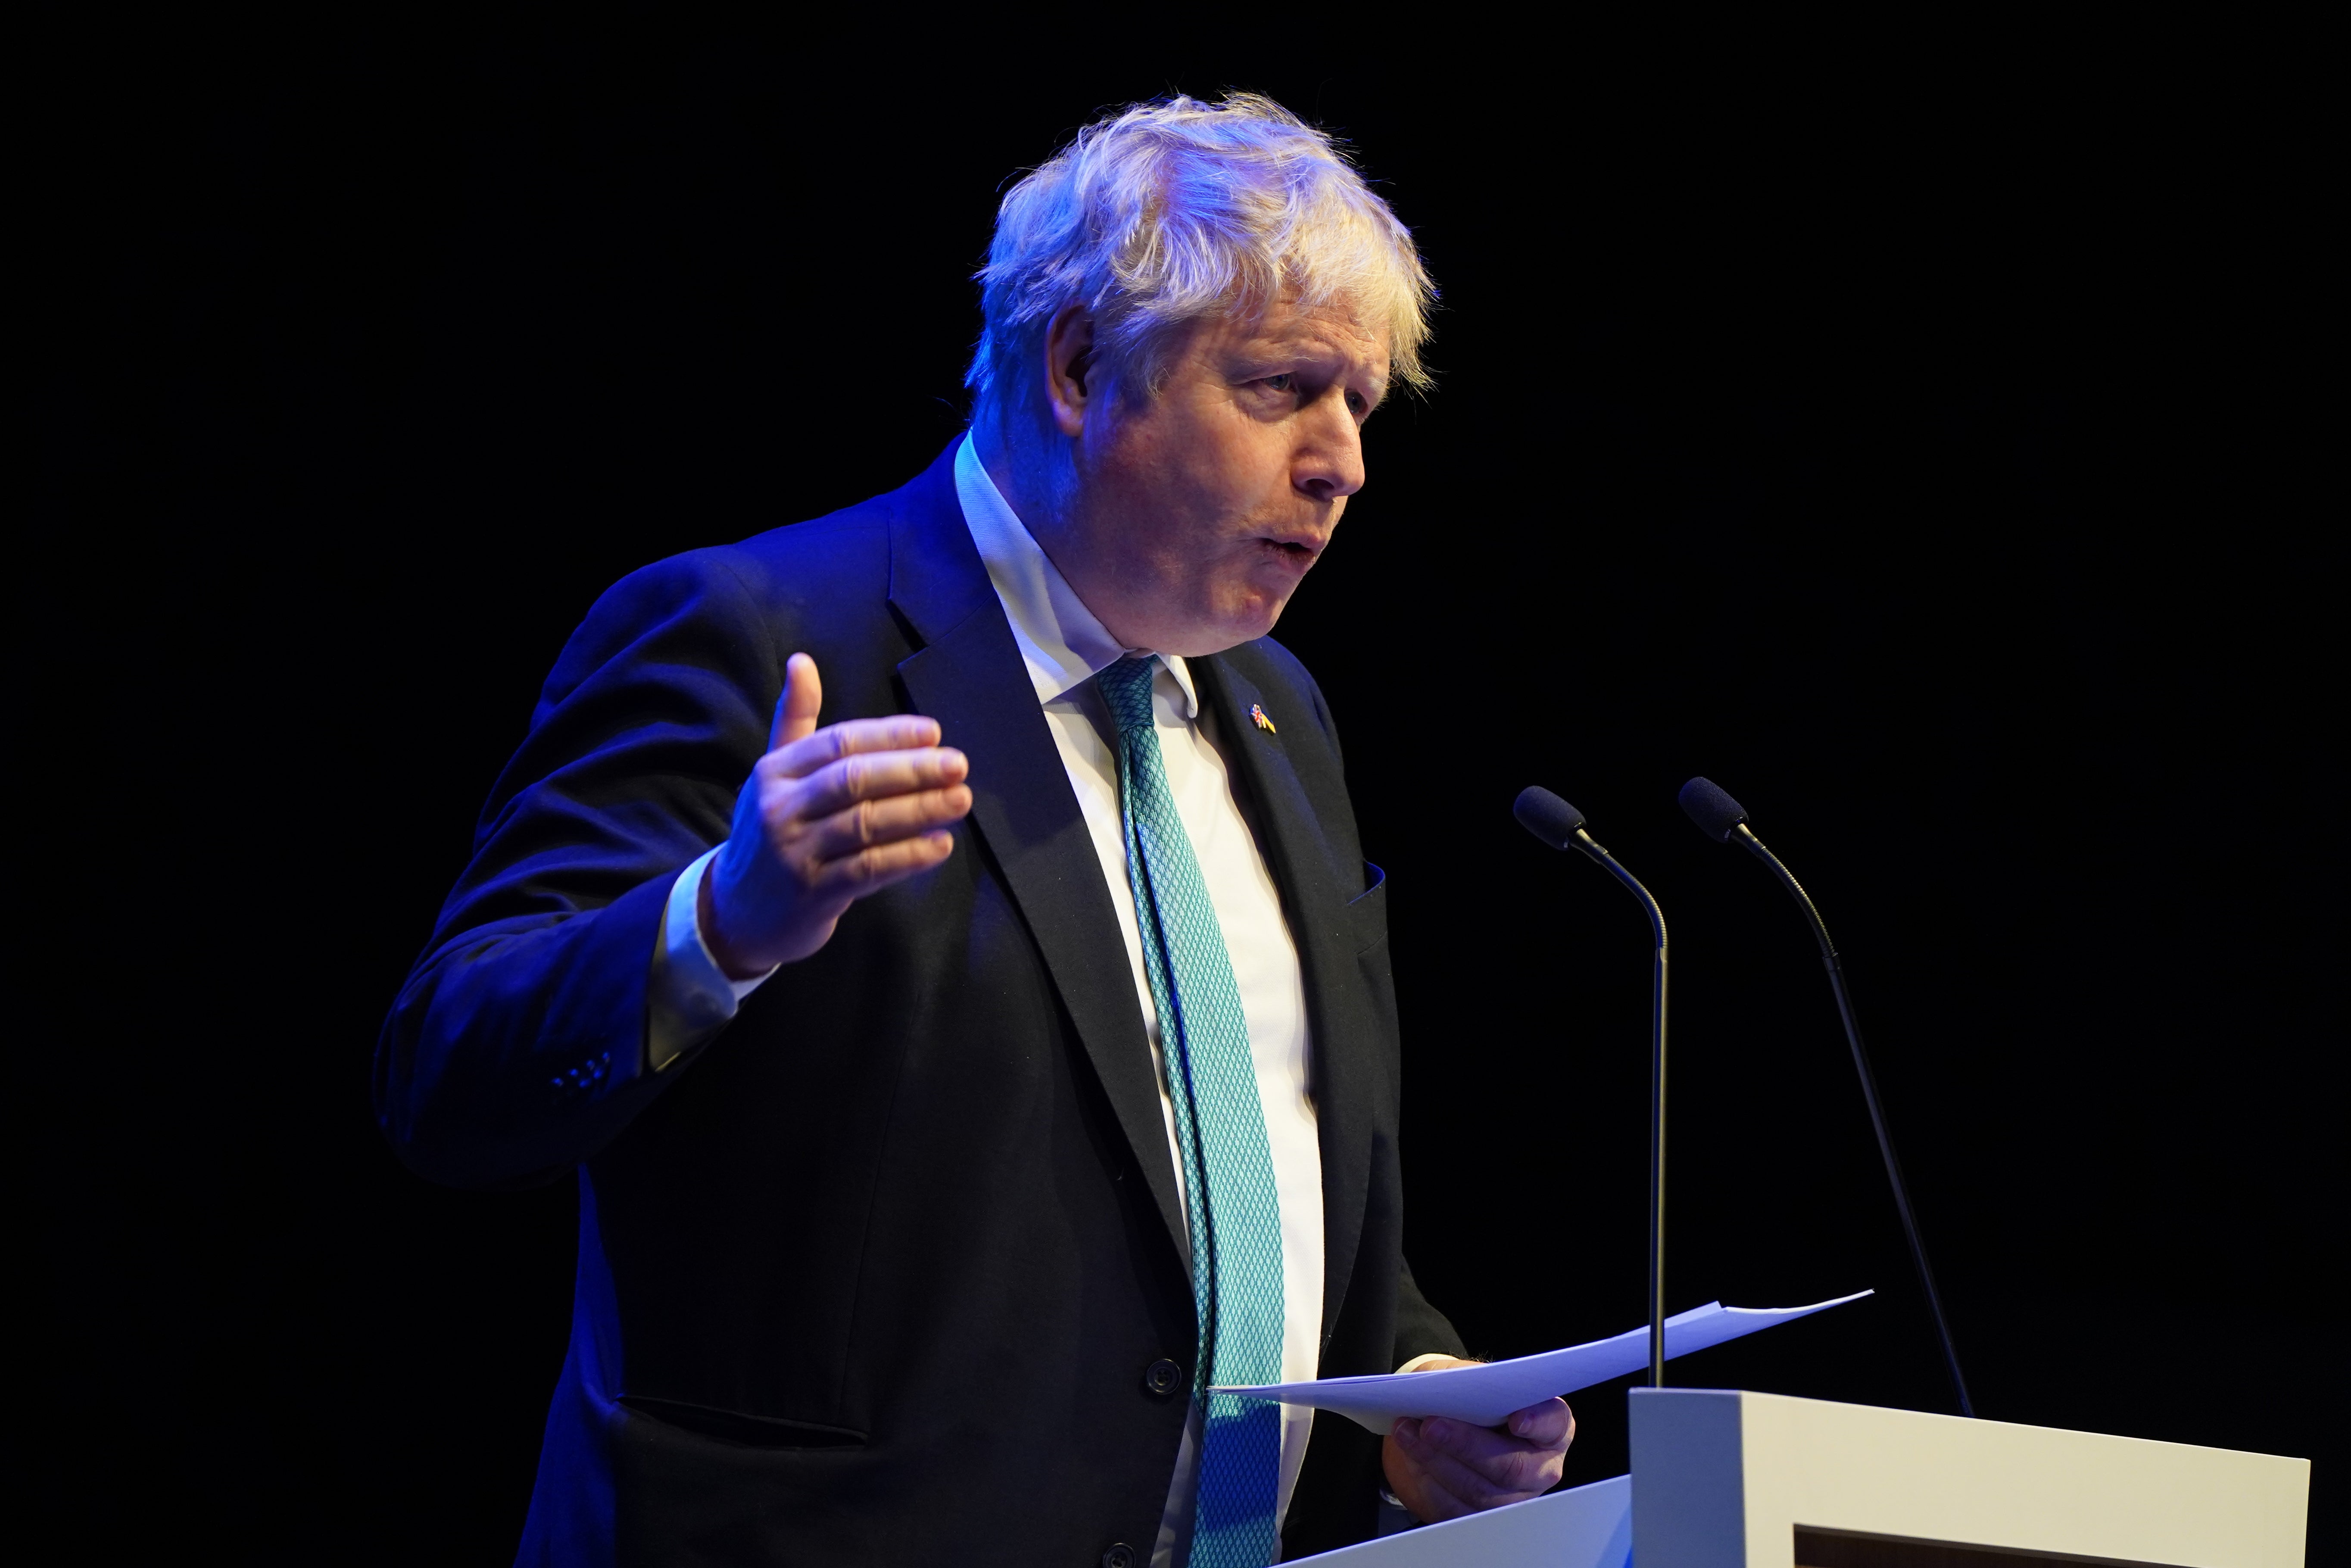 Boris Johnson is clinging to power after receiving a penalty notice for Partygate